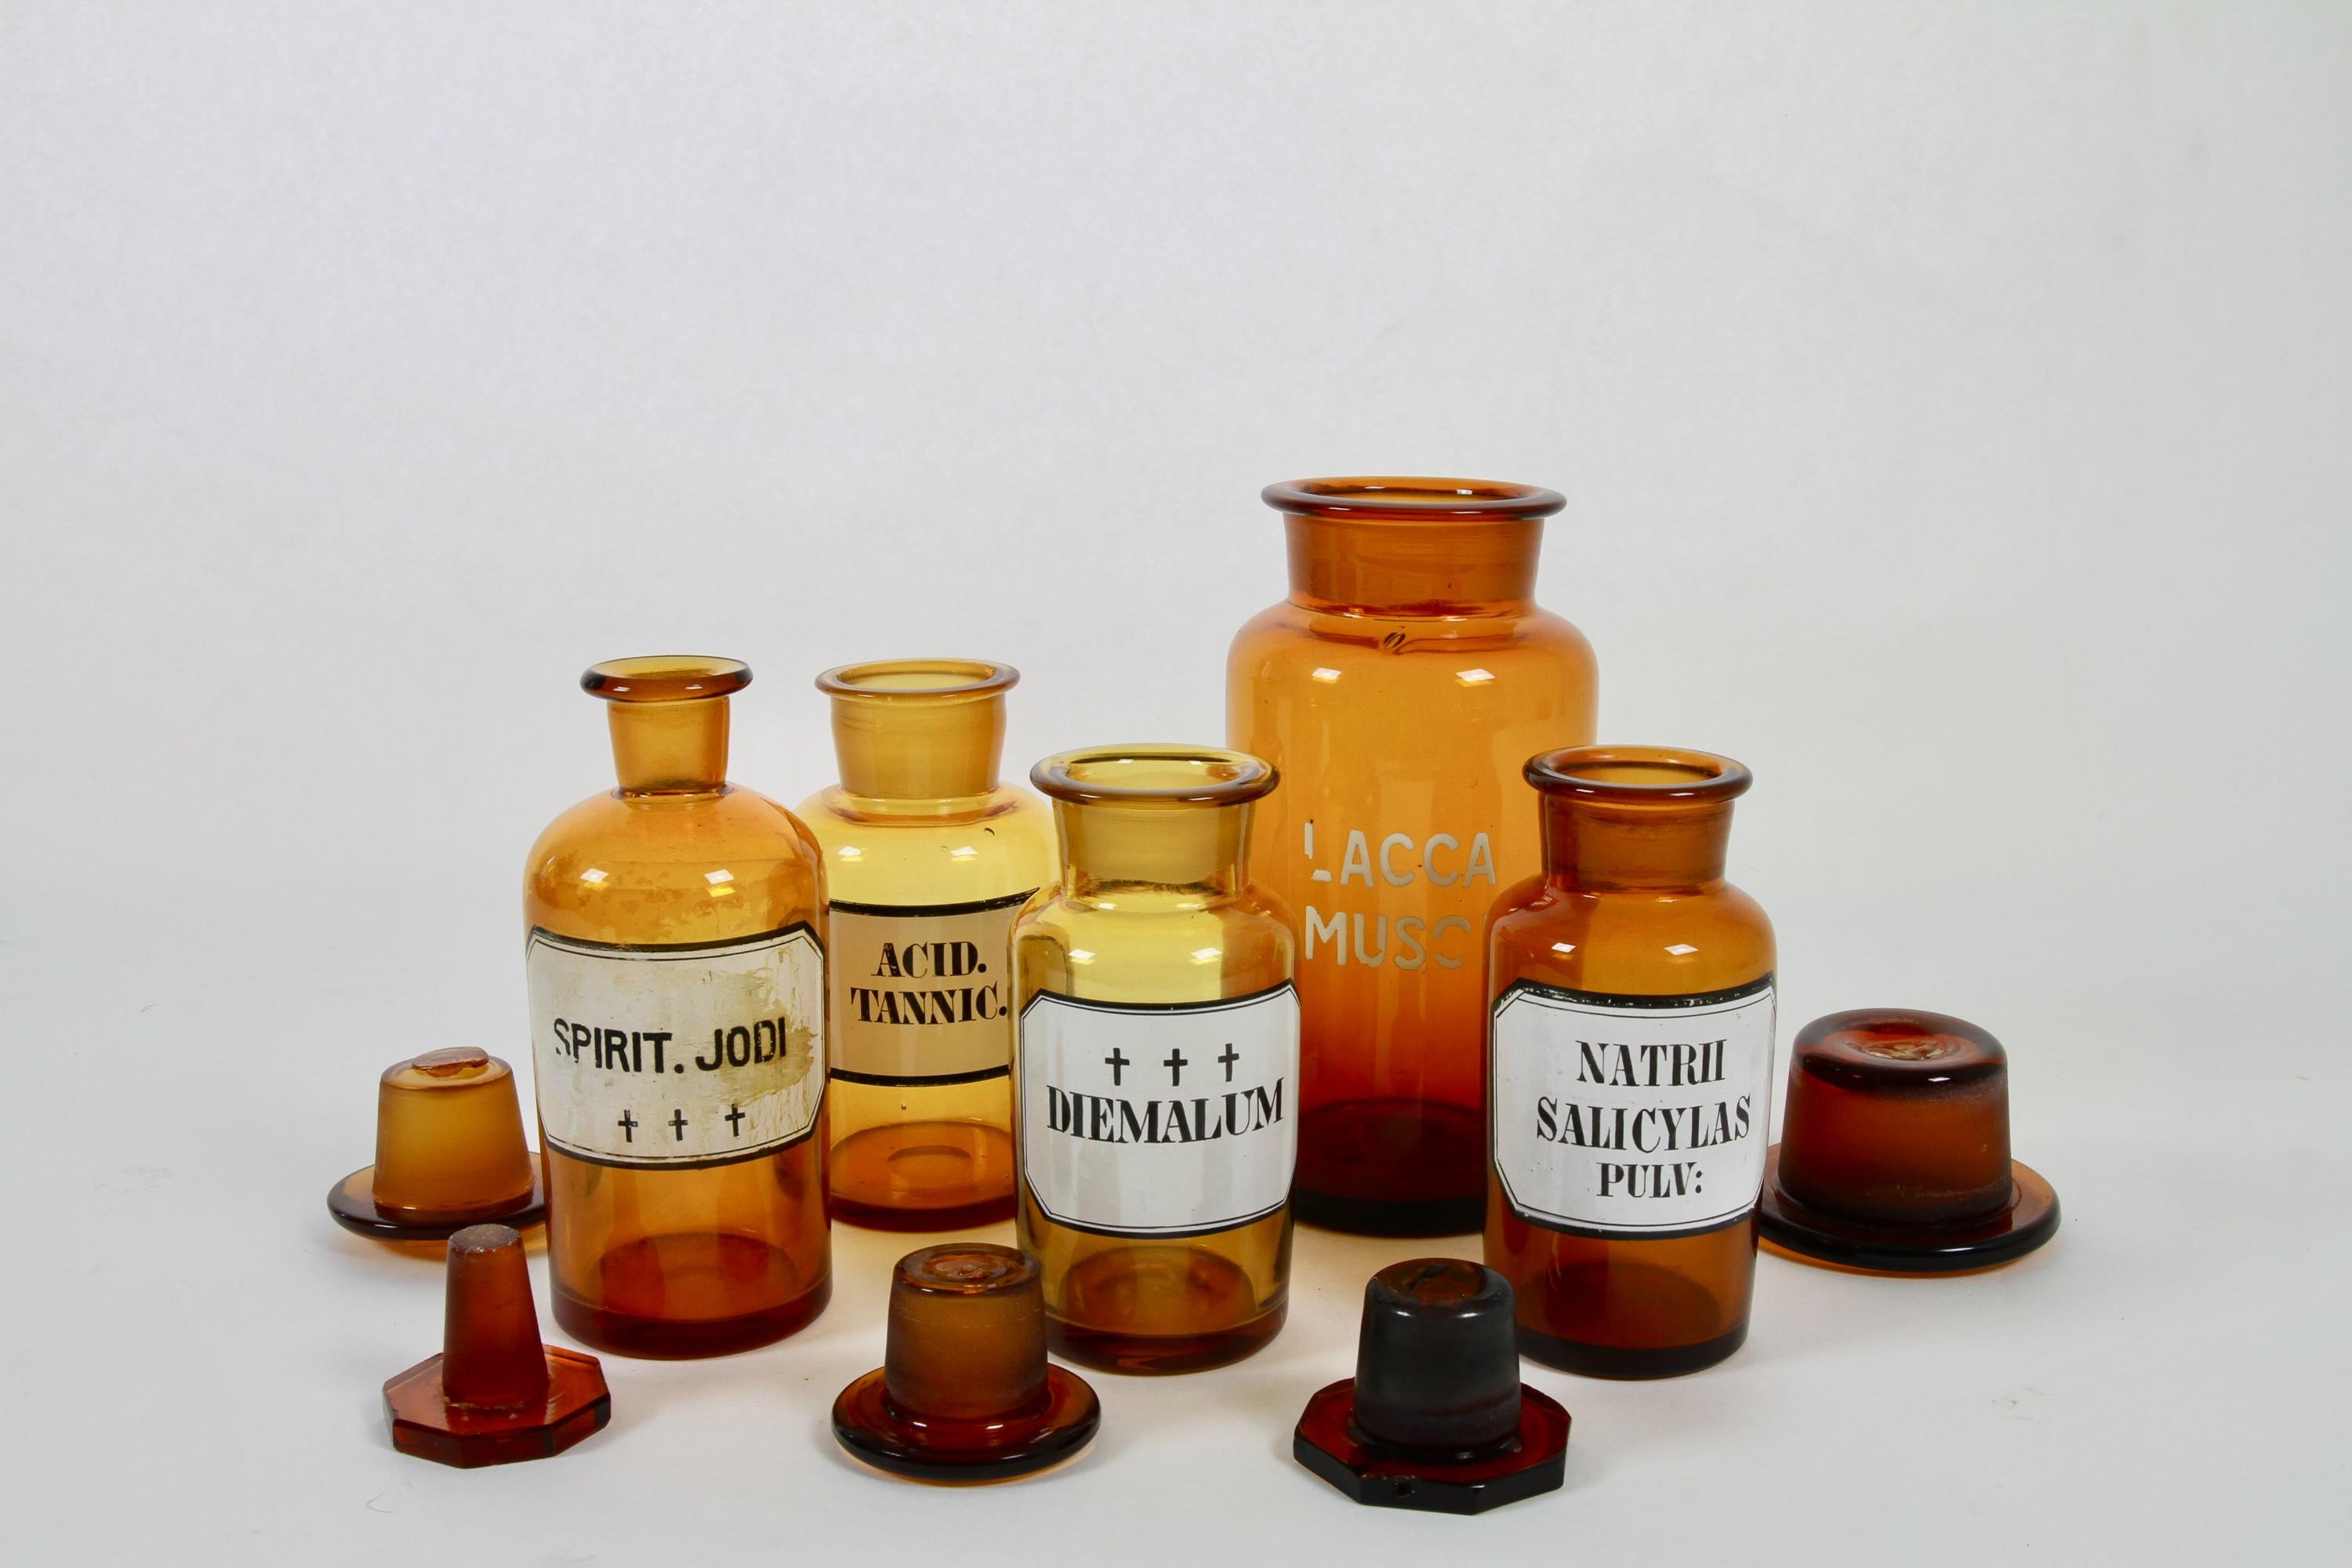 Antique Danish pharmacy glass bottles, 1900s, set of 5.
This type of bottle was used in Danish pharmacies in the first half of the 20th century.
Tallest bottle is 19 cm tall, smallest is 13 cm.
Very good condition. Complete with lids.